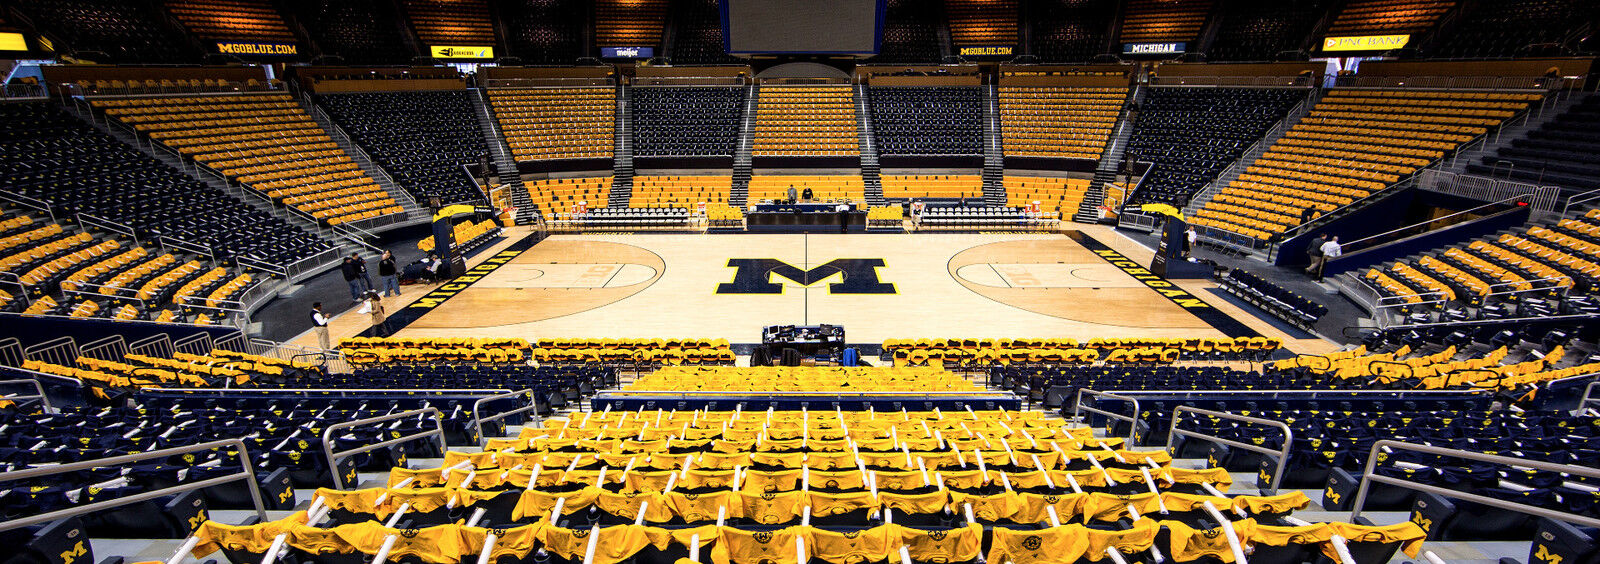 U Of M Basketball Schedule | Examples and Forms